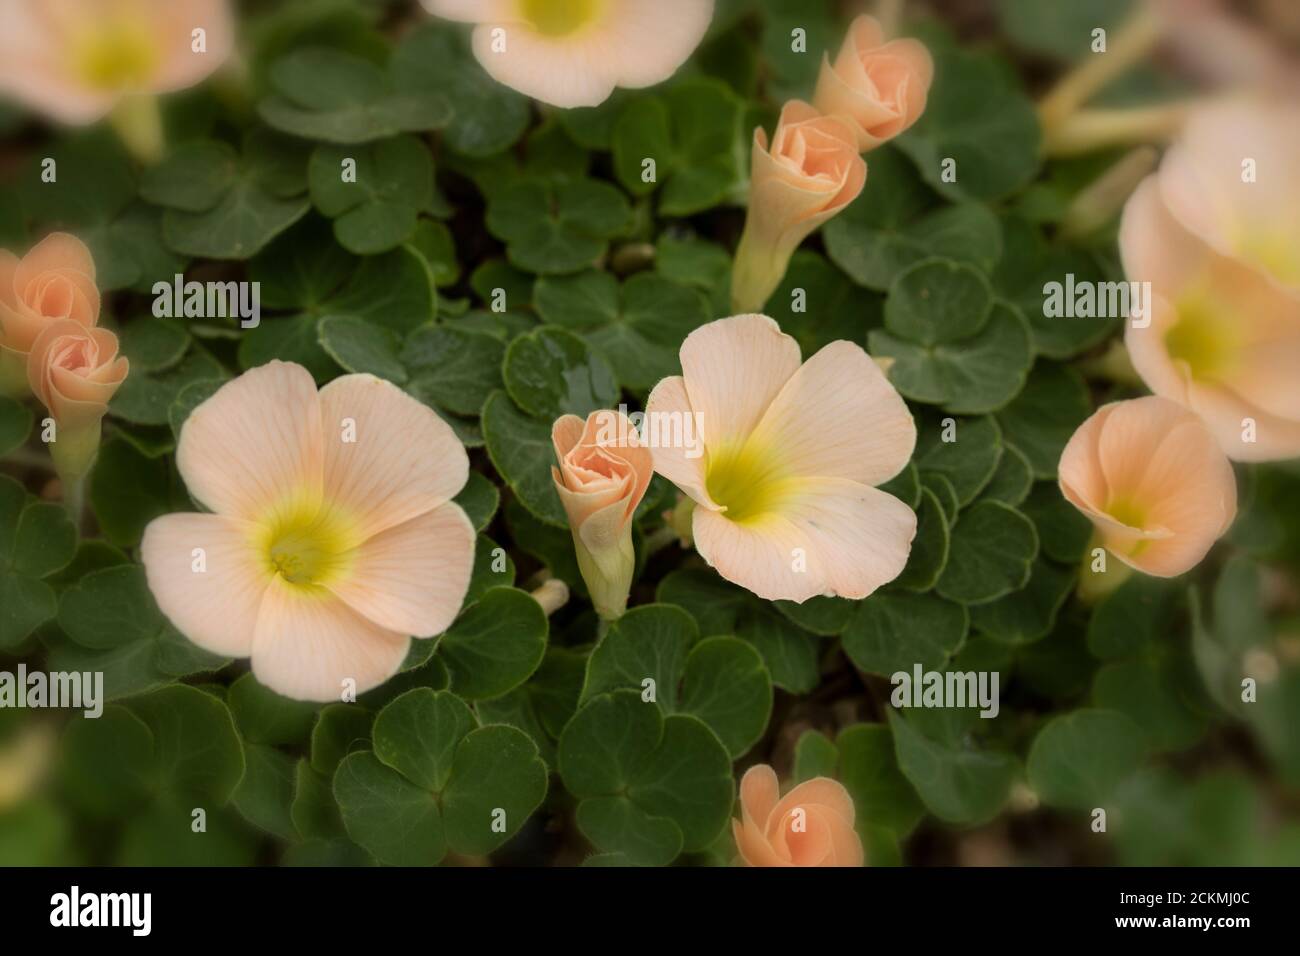 Oxalis Pulchella var Tomentosa flowers and foliage, nature close-up portrait Stock Photo